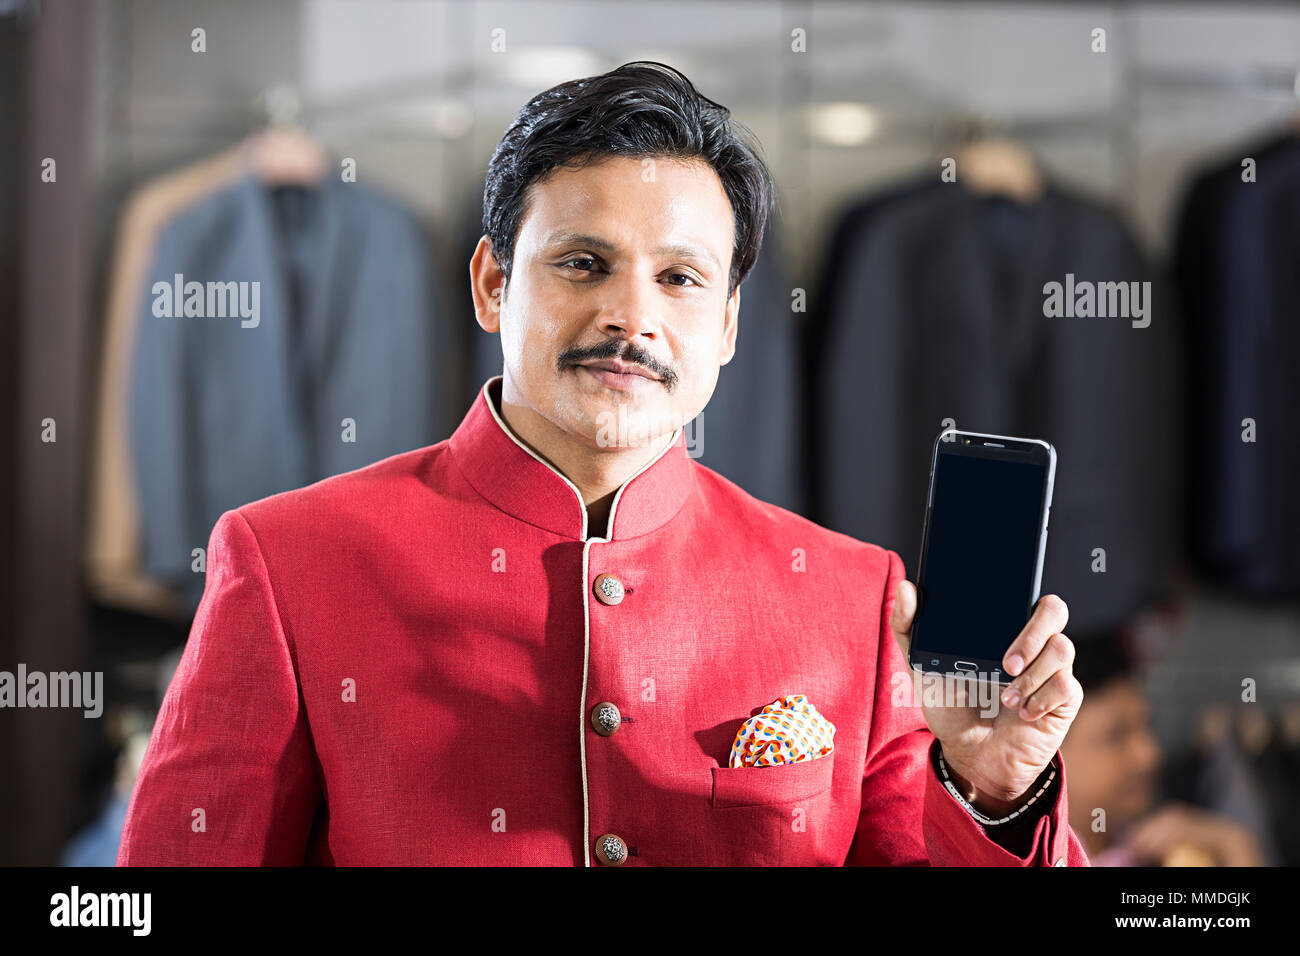 One Adult Male Customer Showing Smartphone Screen In Store Market Stock Photo